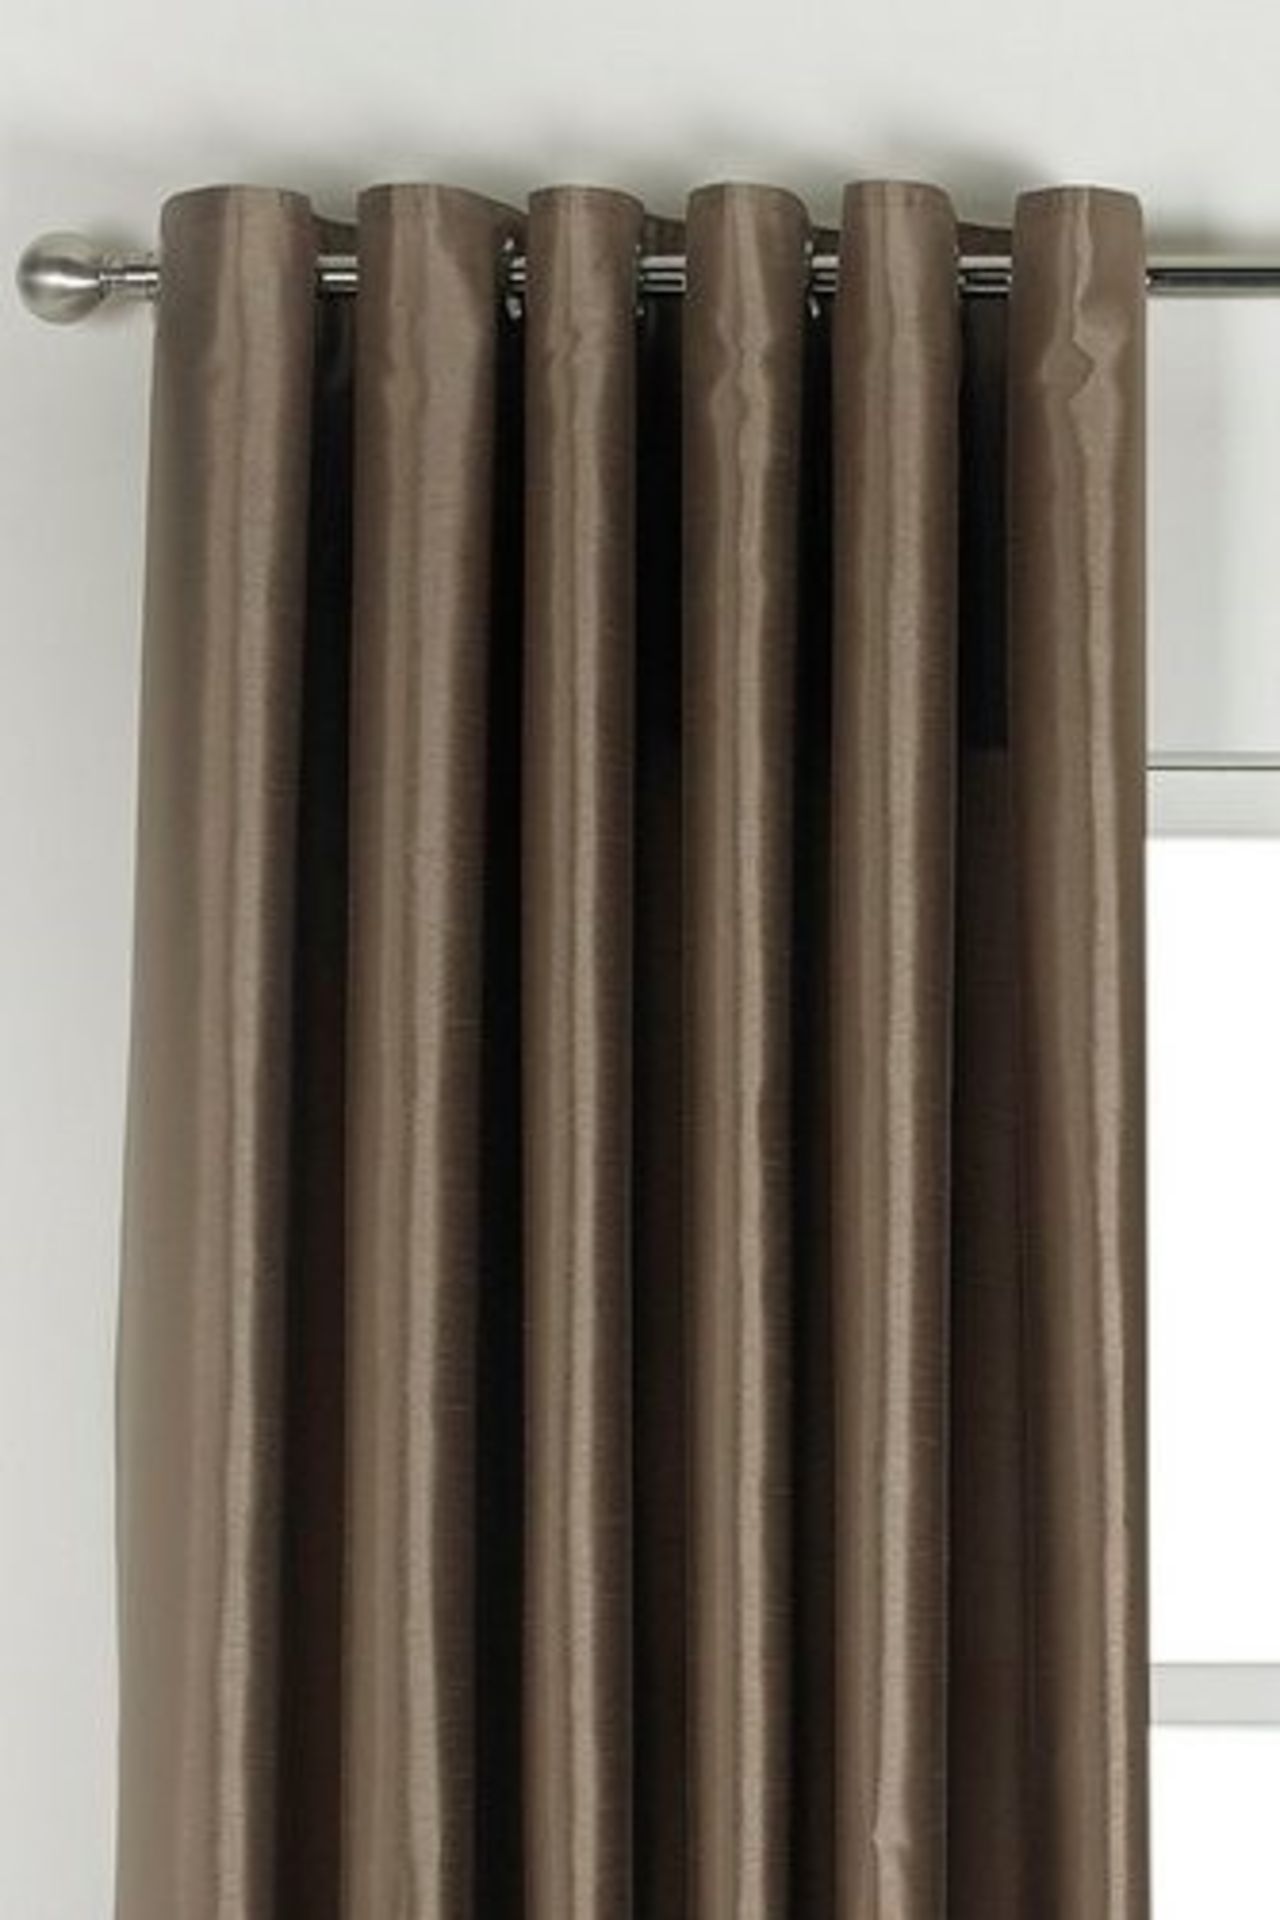 1 PACKAGED FAUX SILK FULLY LINED EYELET CURTAINS IN MINK / APPROX 90" X 90" (VIEWING HIGHLY